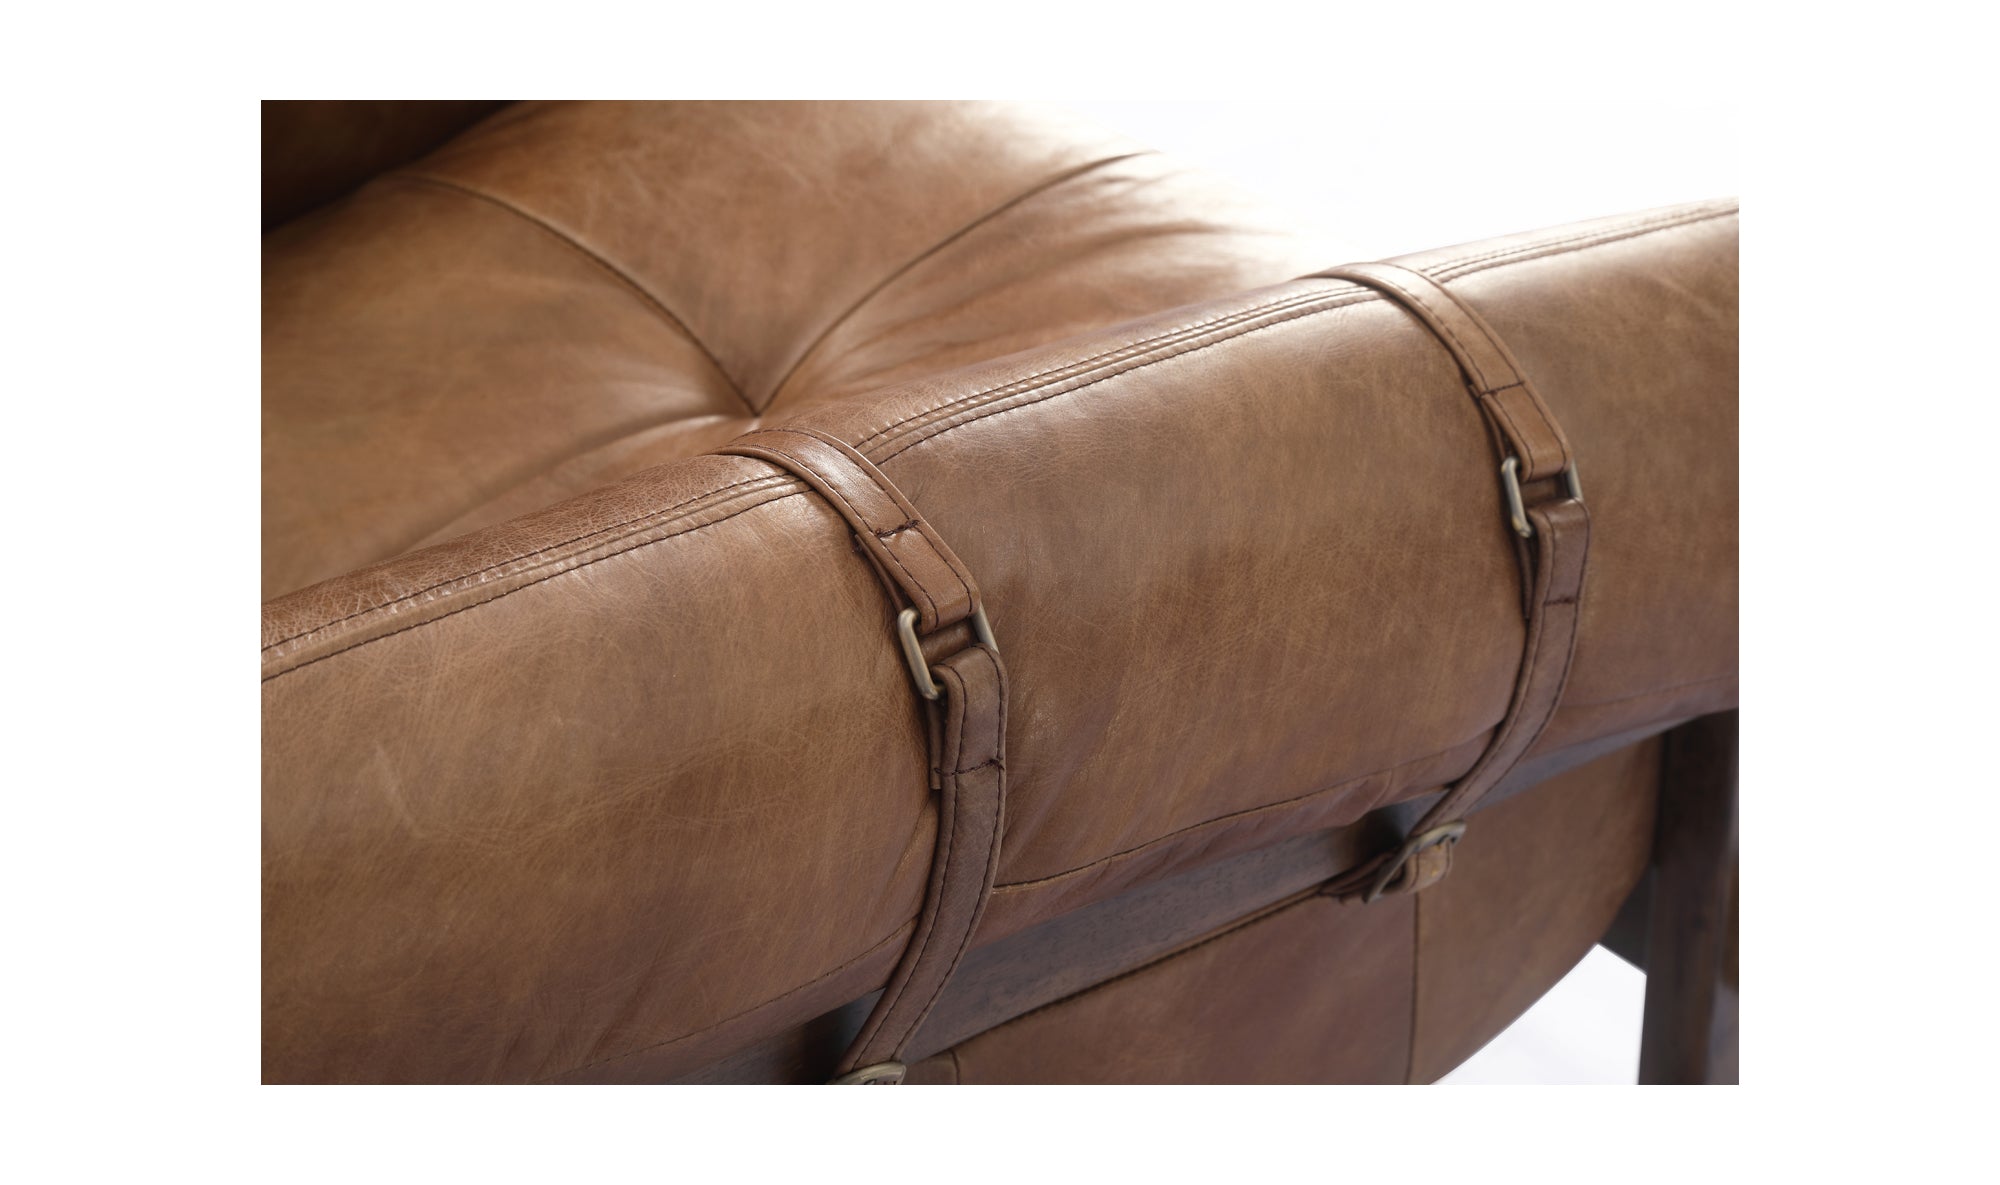 Bellos Accent Chair - Open Road Brown Leather